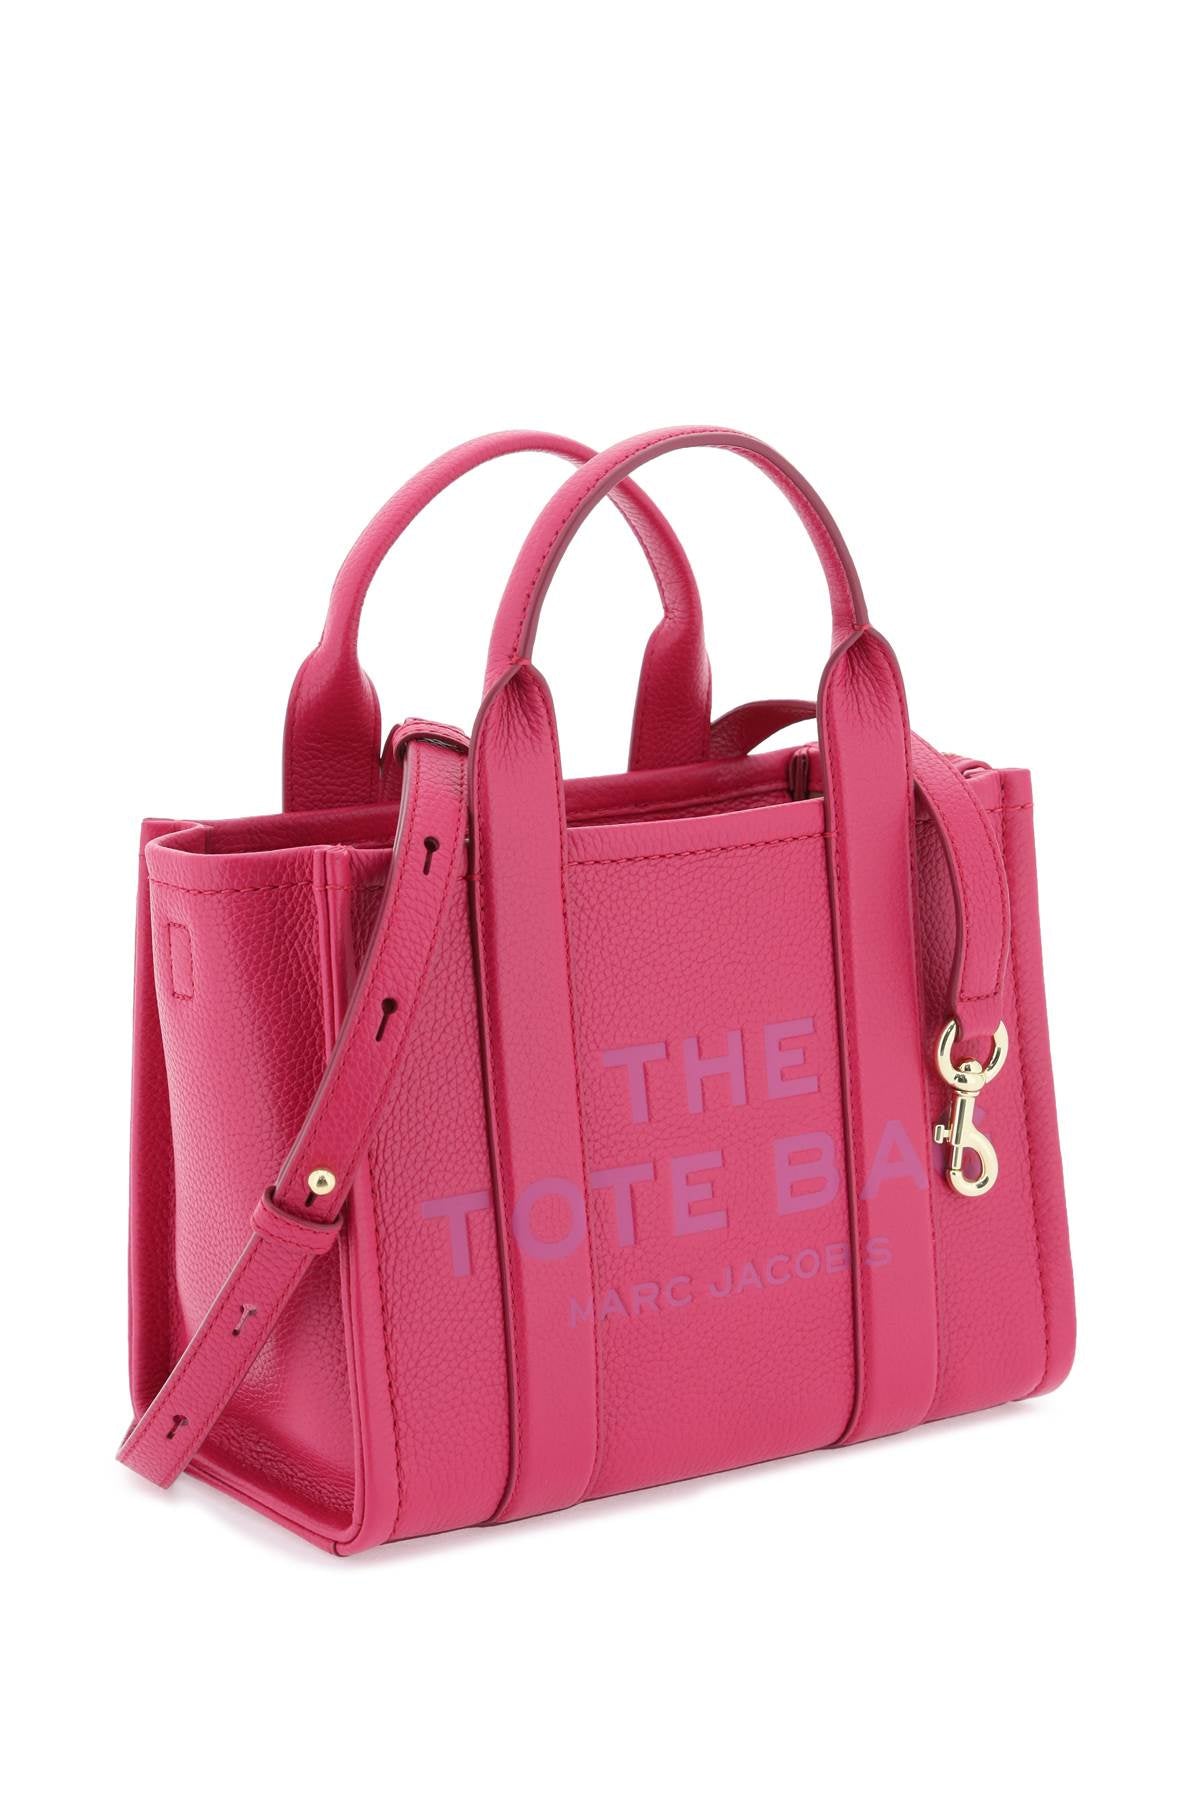 Marc jacobs the leather small tote bag-2